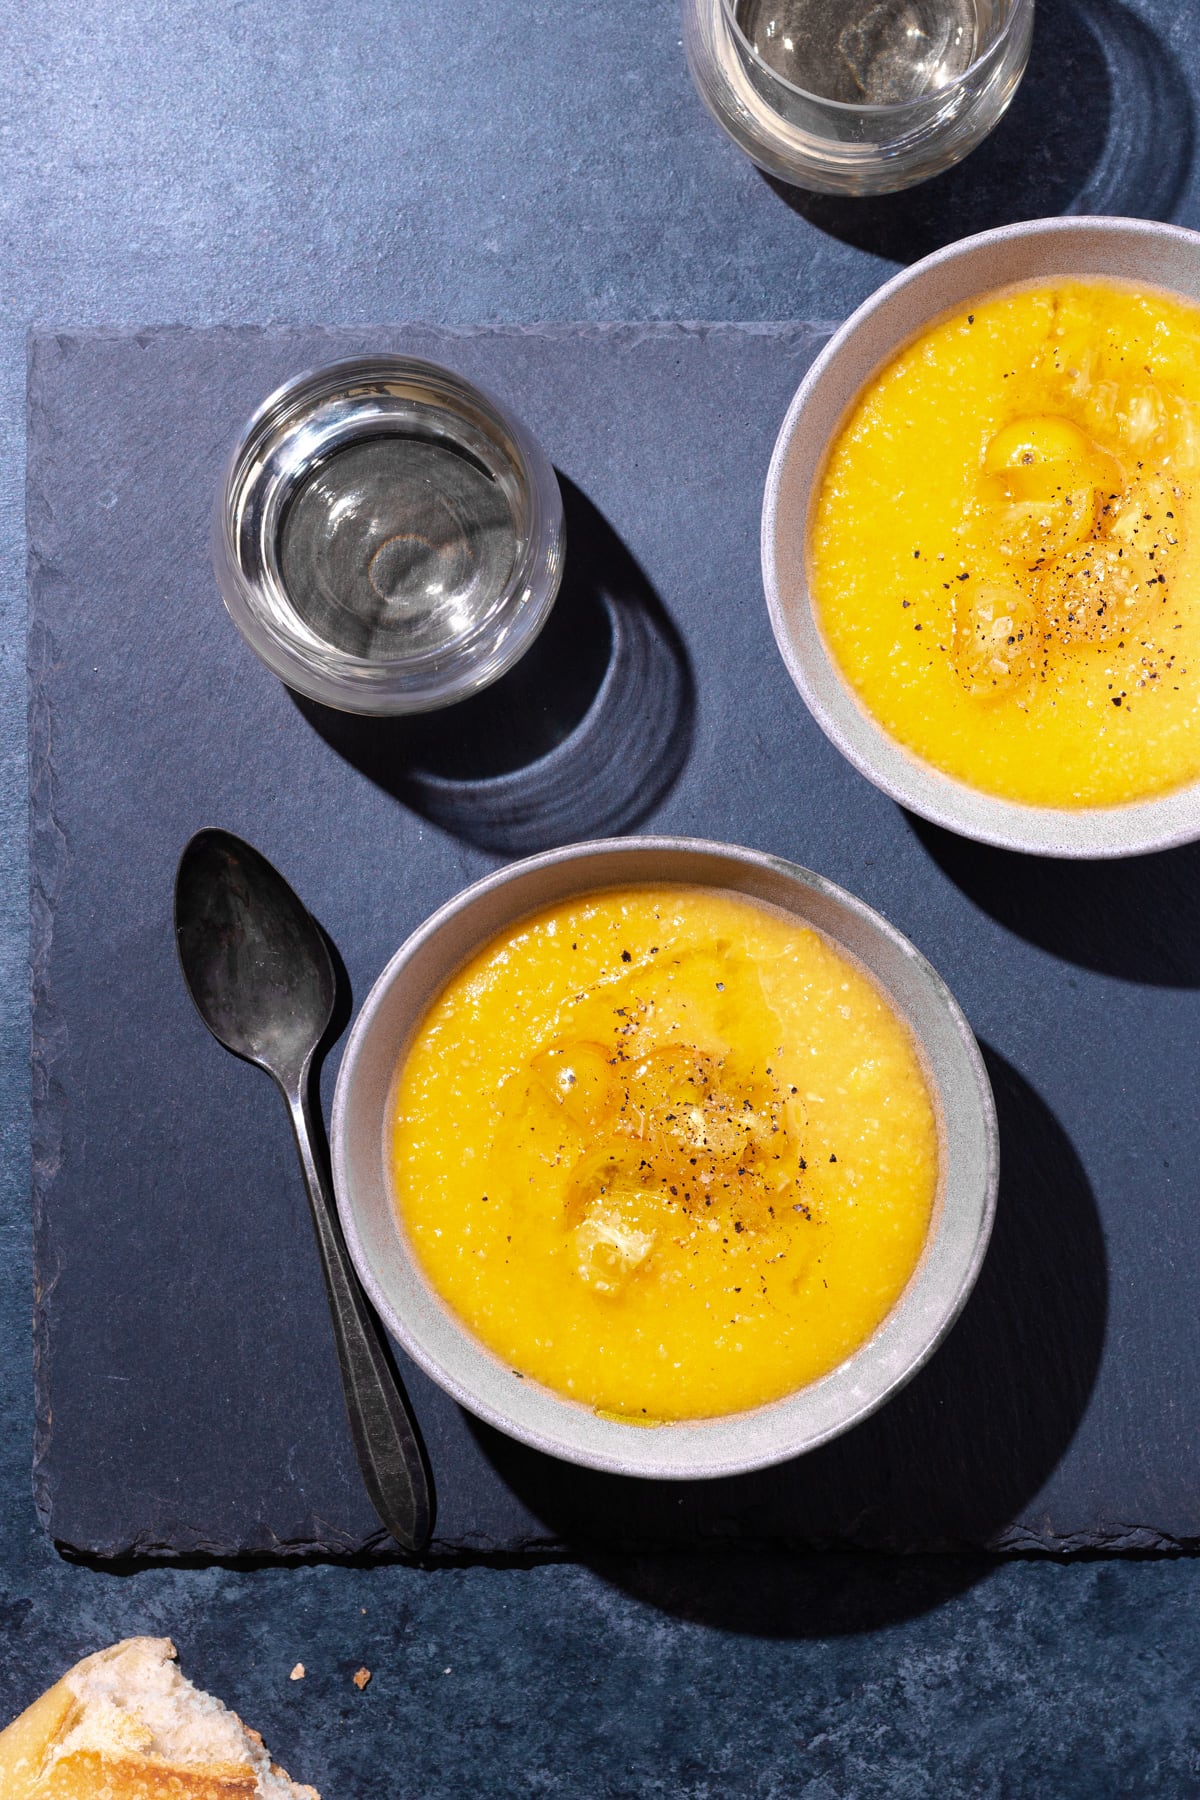 Overhead view of two bowls of yellow gazpacho on a slate surface next to wine glasses, a spoon and a piece of bread.